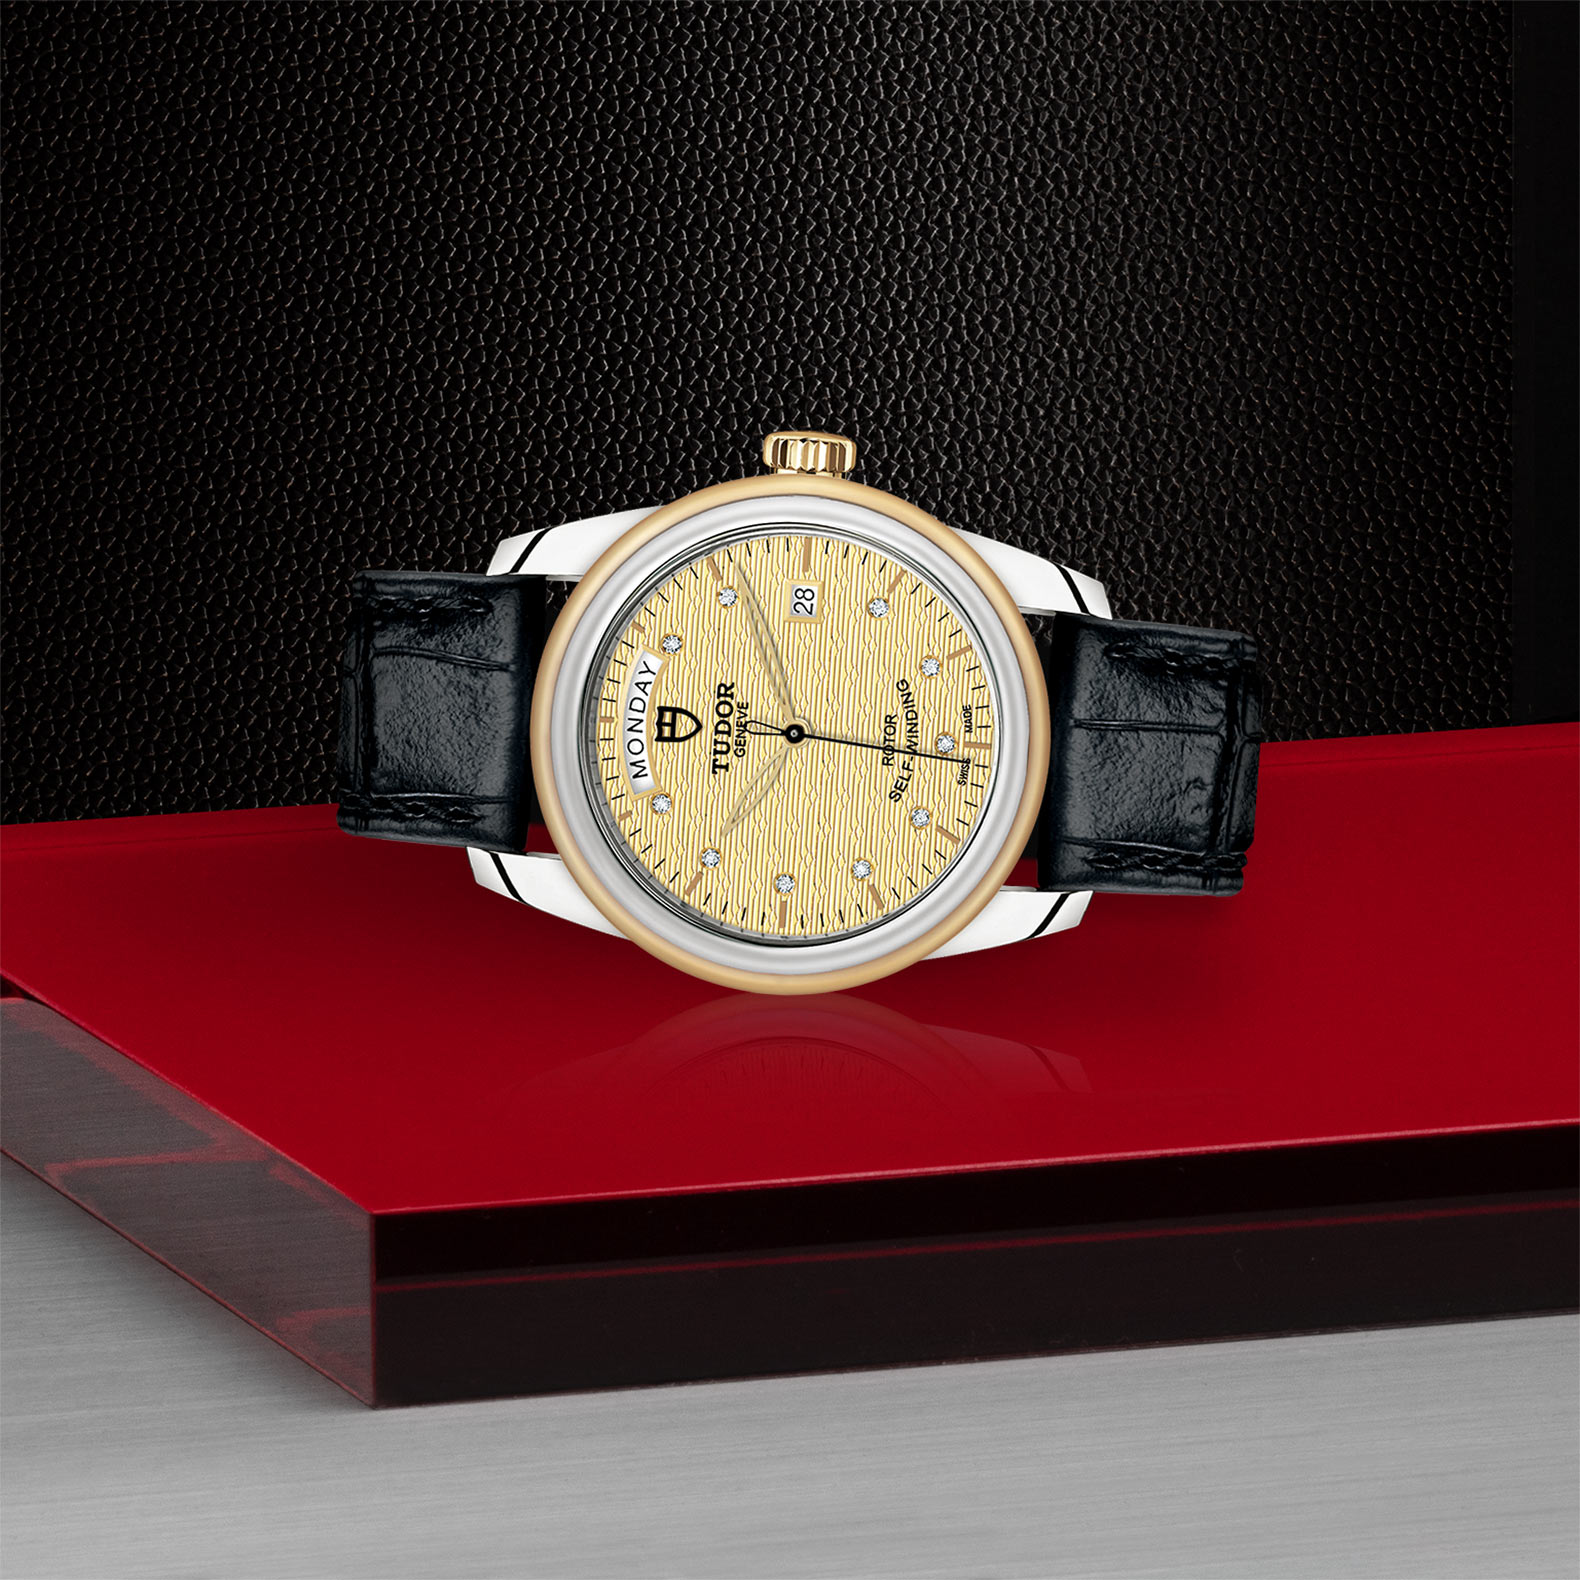 Tudor Glamour Date+Day M56003-0029